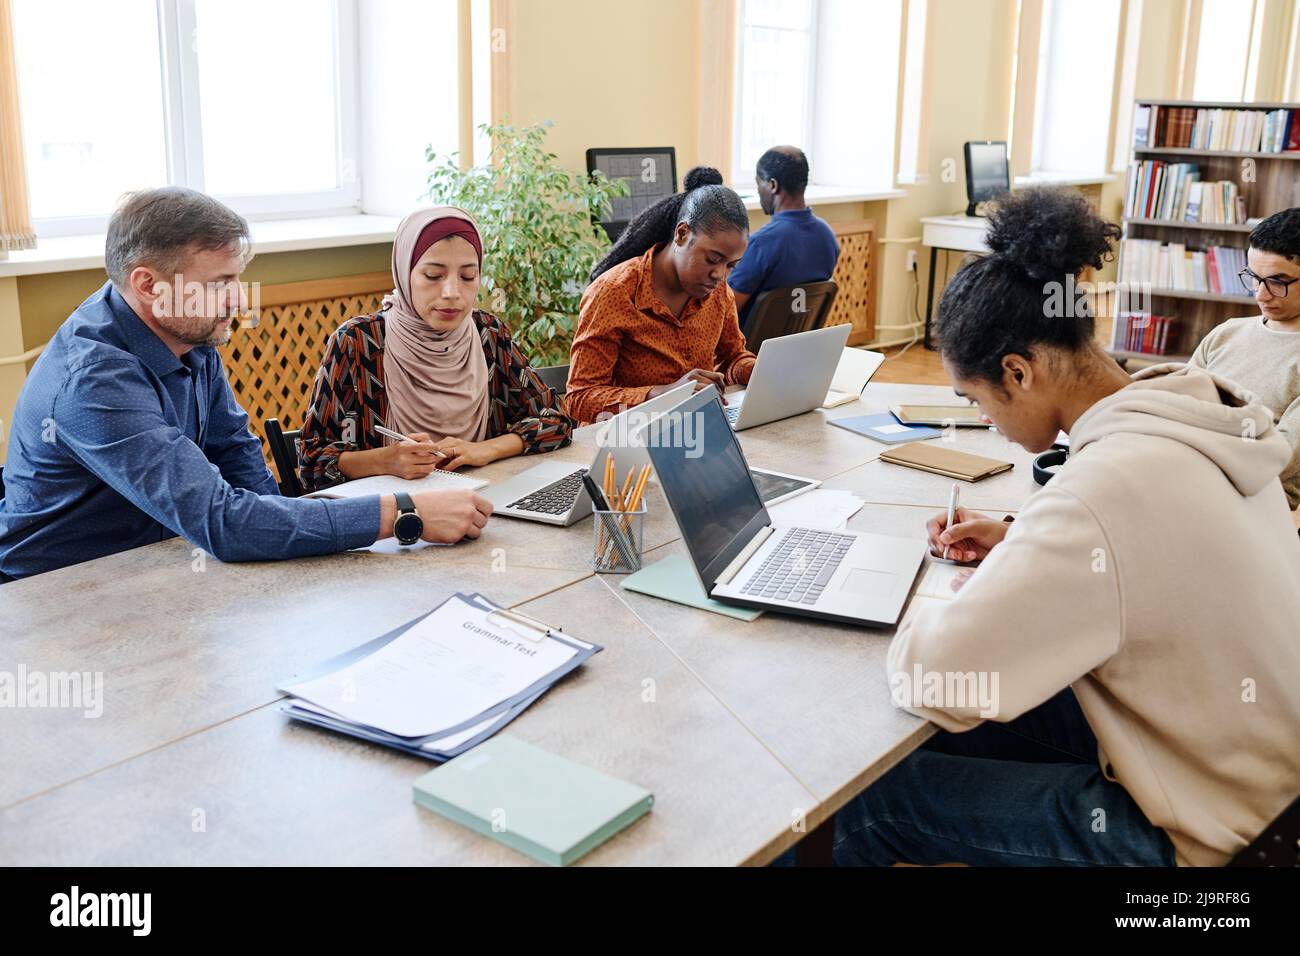 Group of multi-ethnic people having integration and language classes using laptops to do writing task Stock Photo